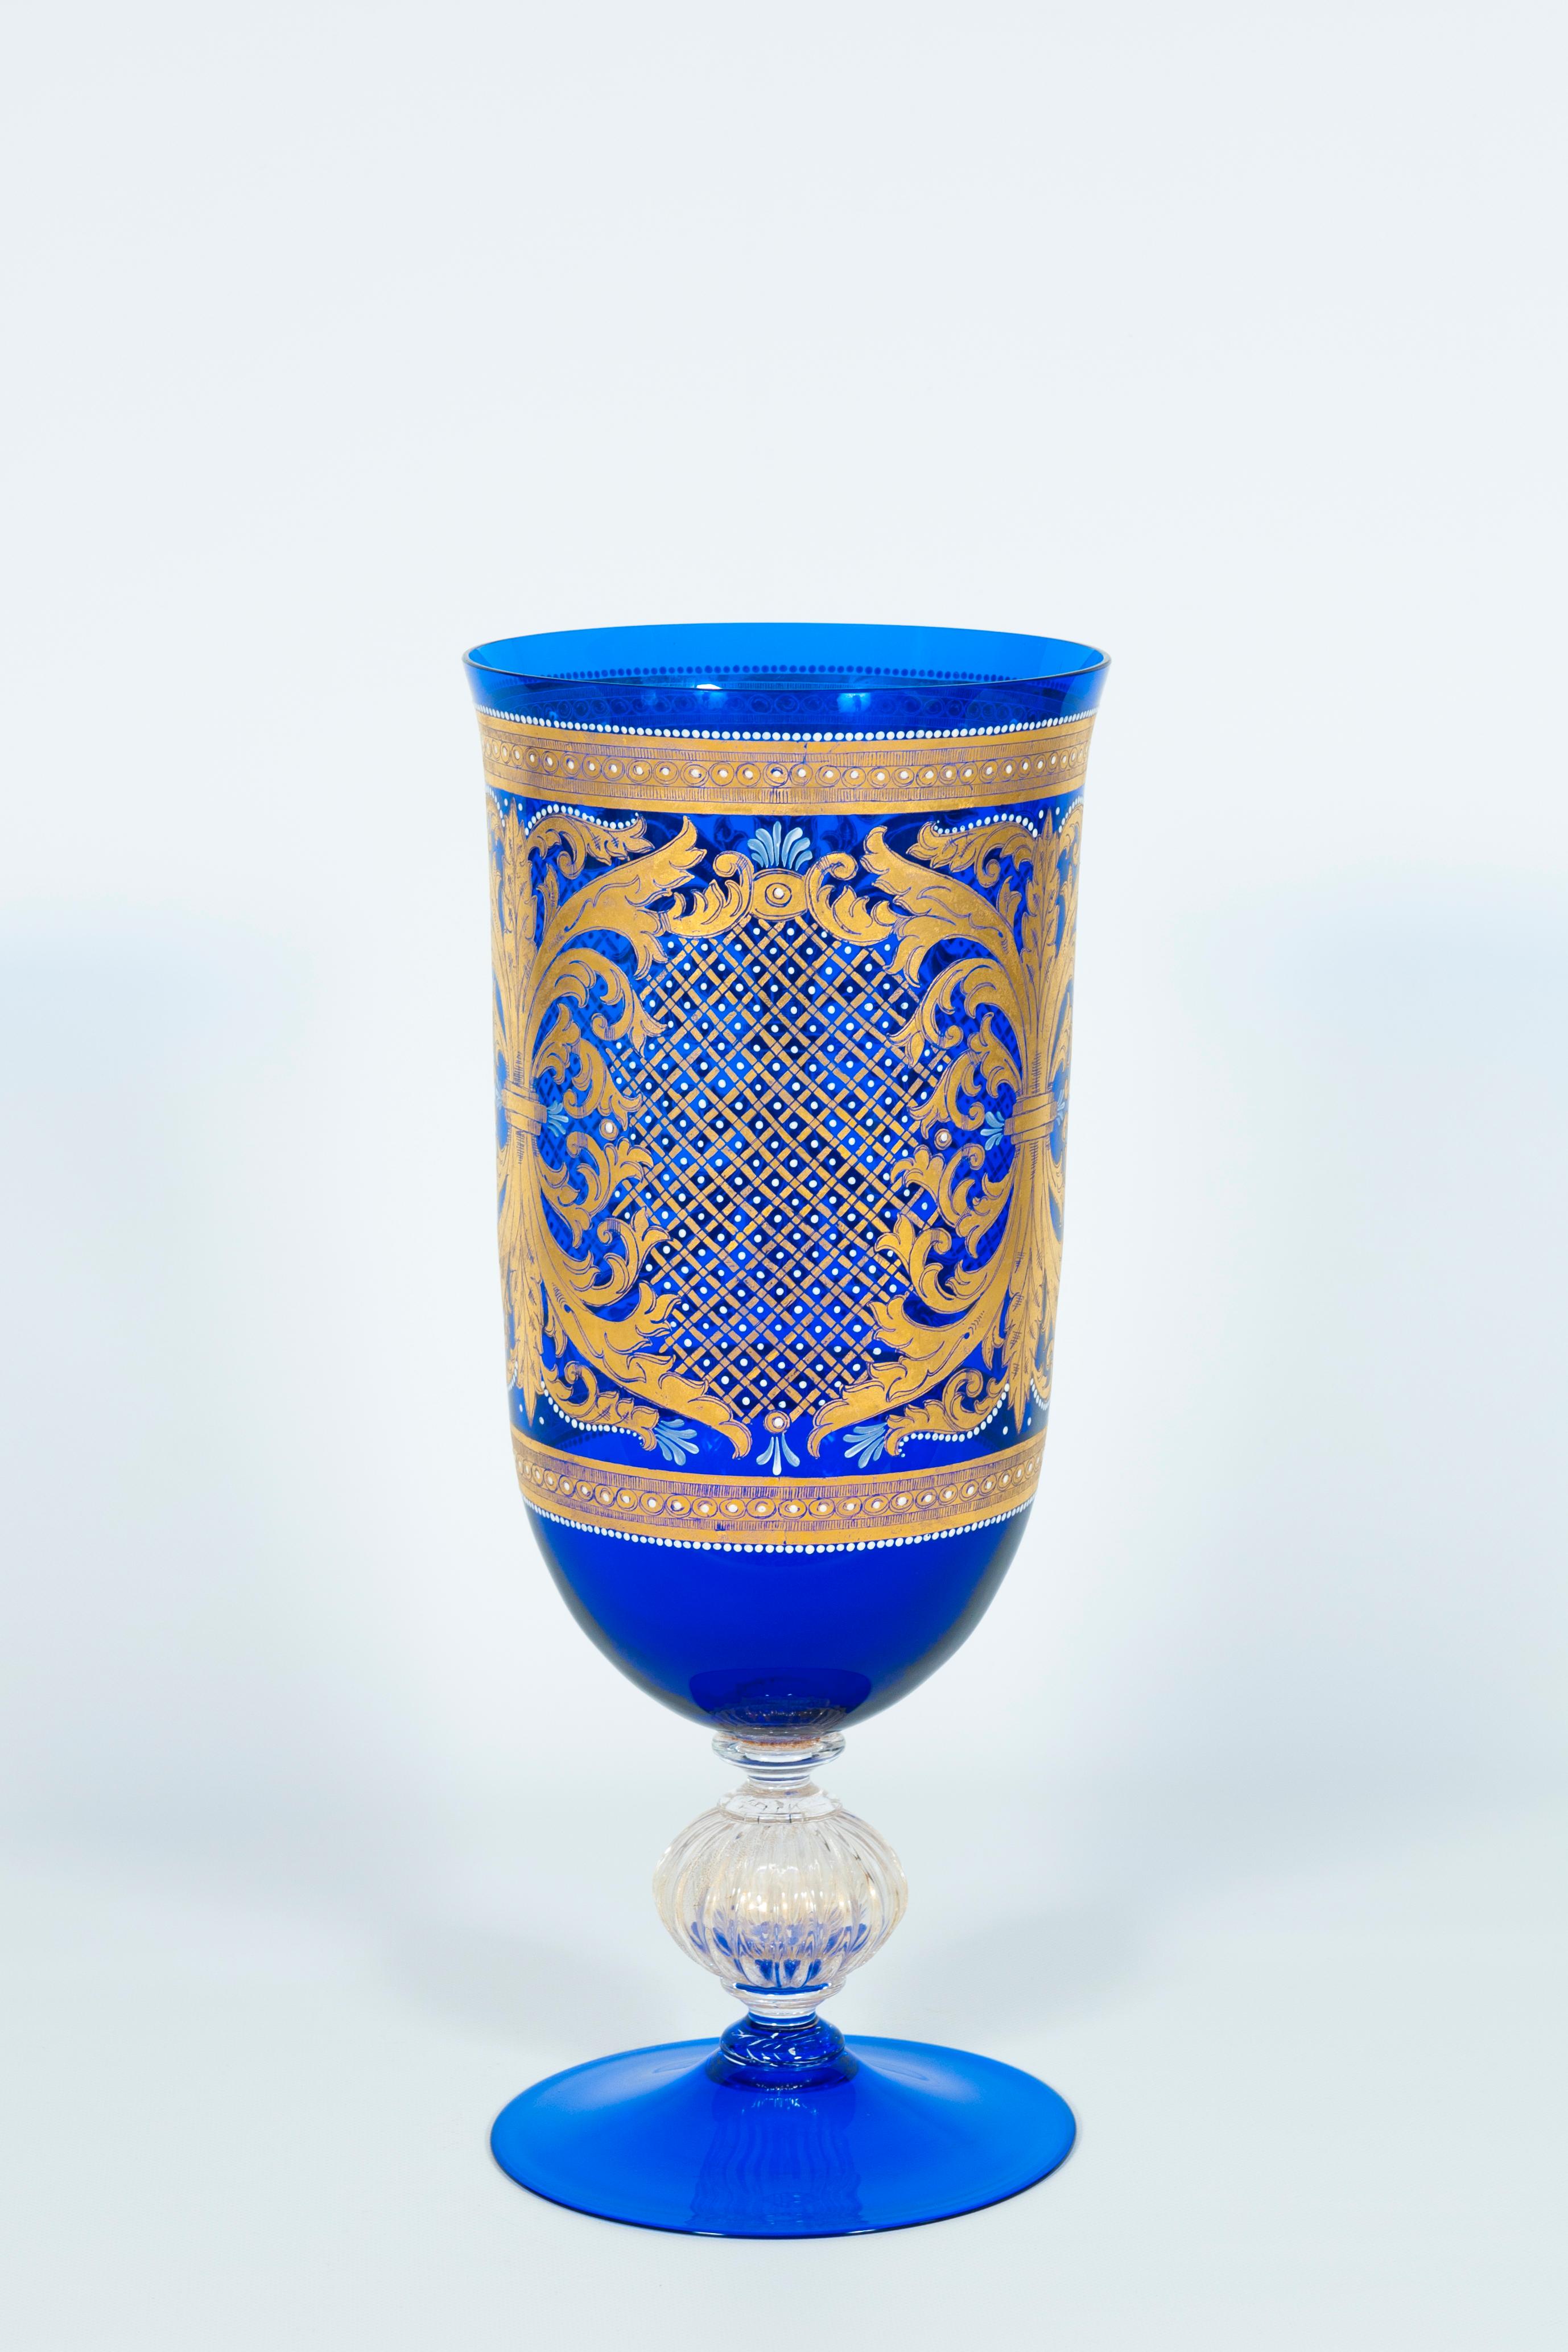 Extra-Large Murano Glass Cup with 24-Carat Gold Decorations, Italy, 1960s For Sale 4